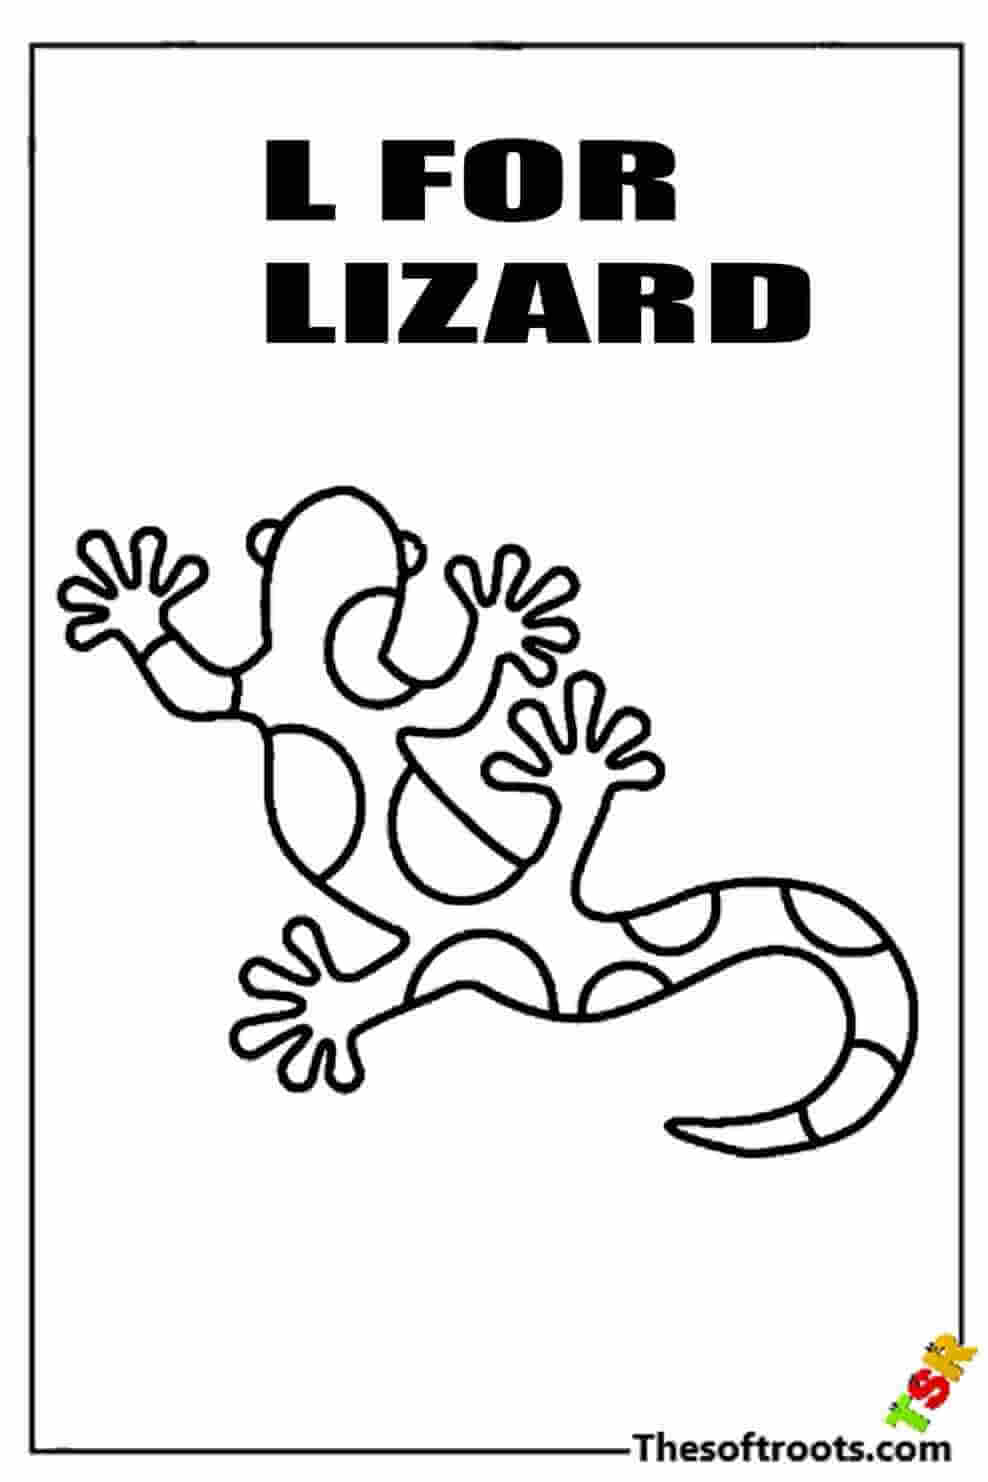 L for lizard coloring pages